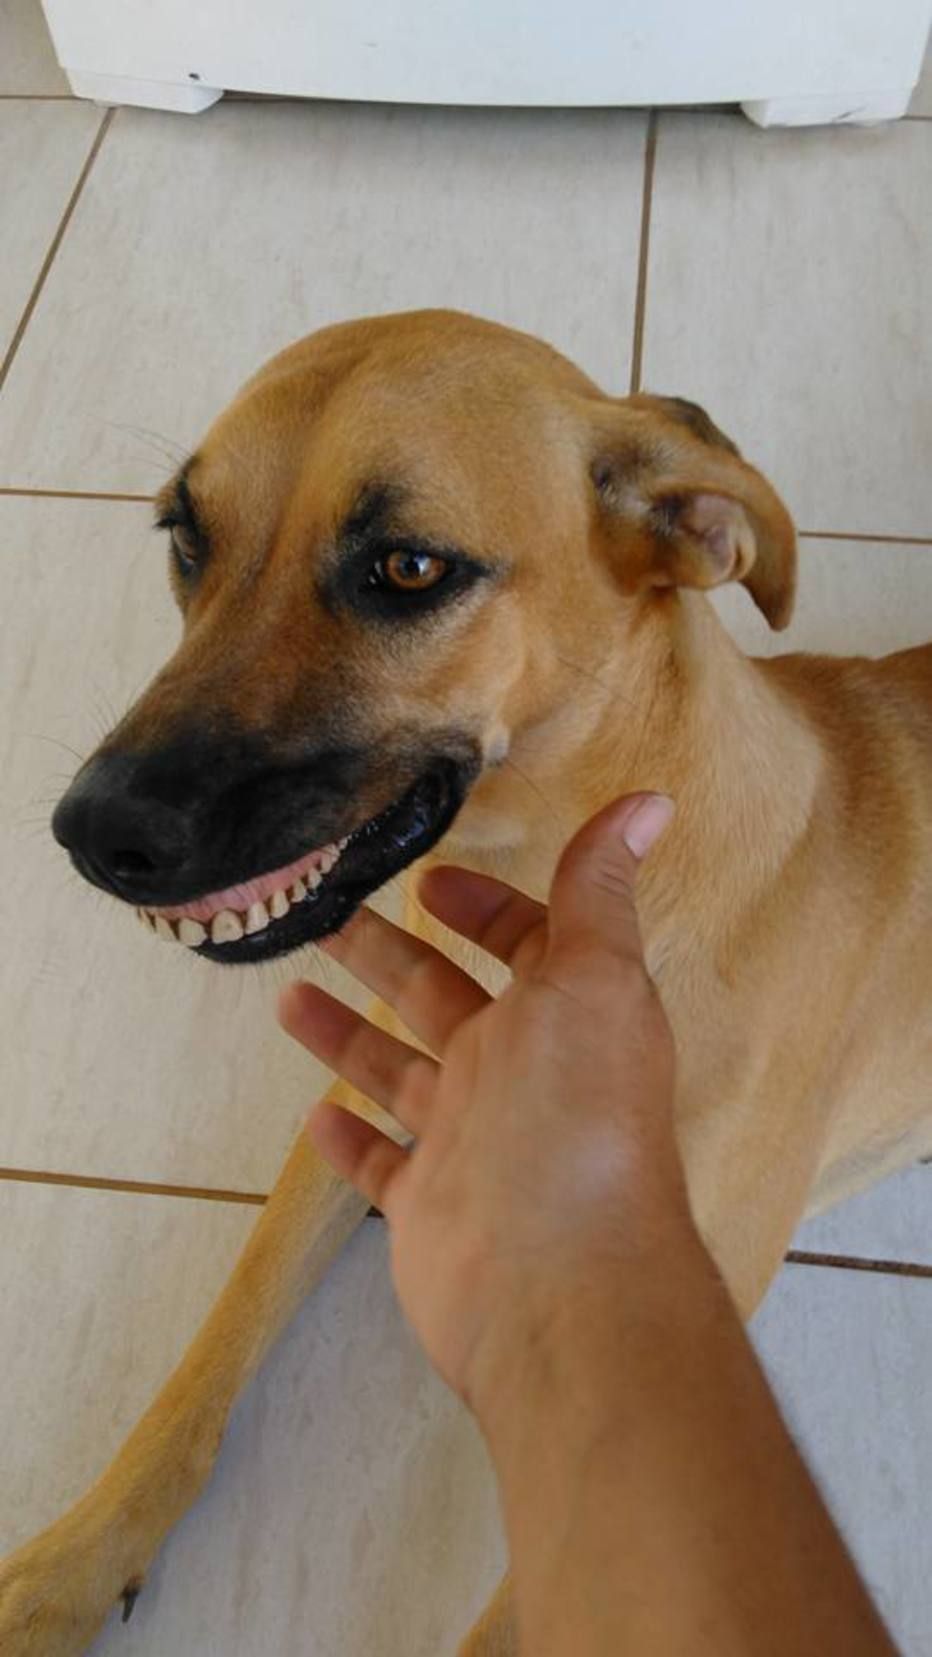 This dog in Brazil found some dentures